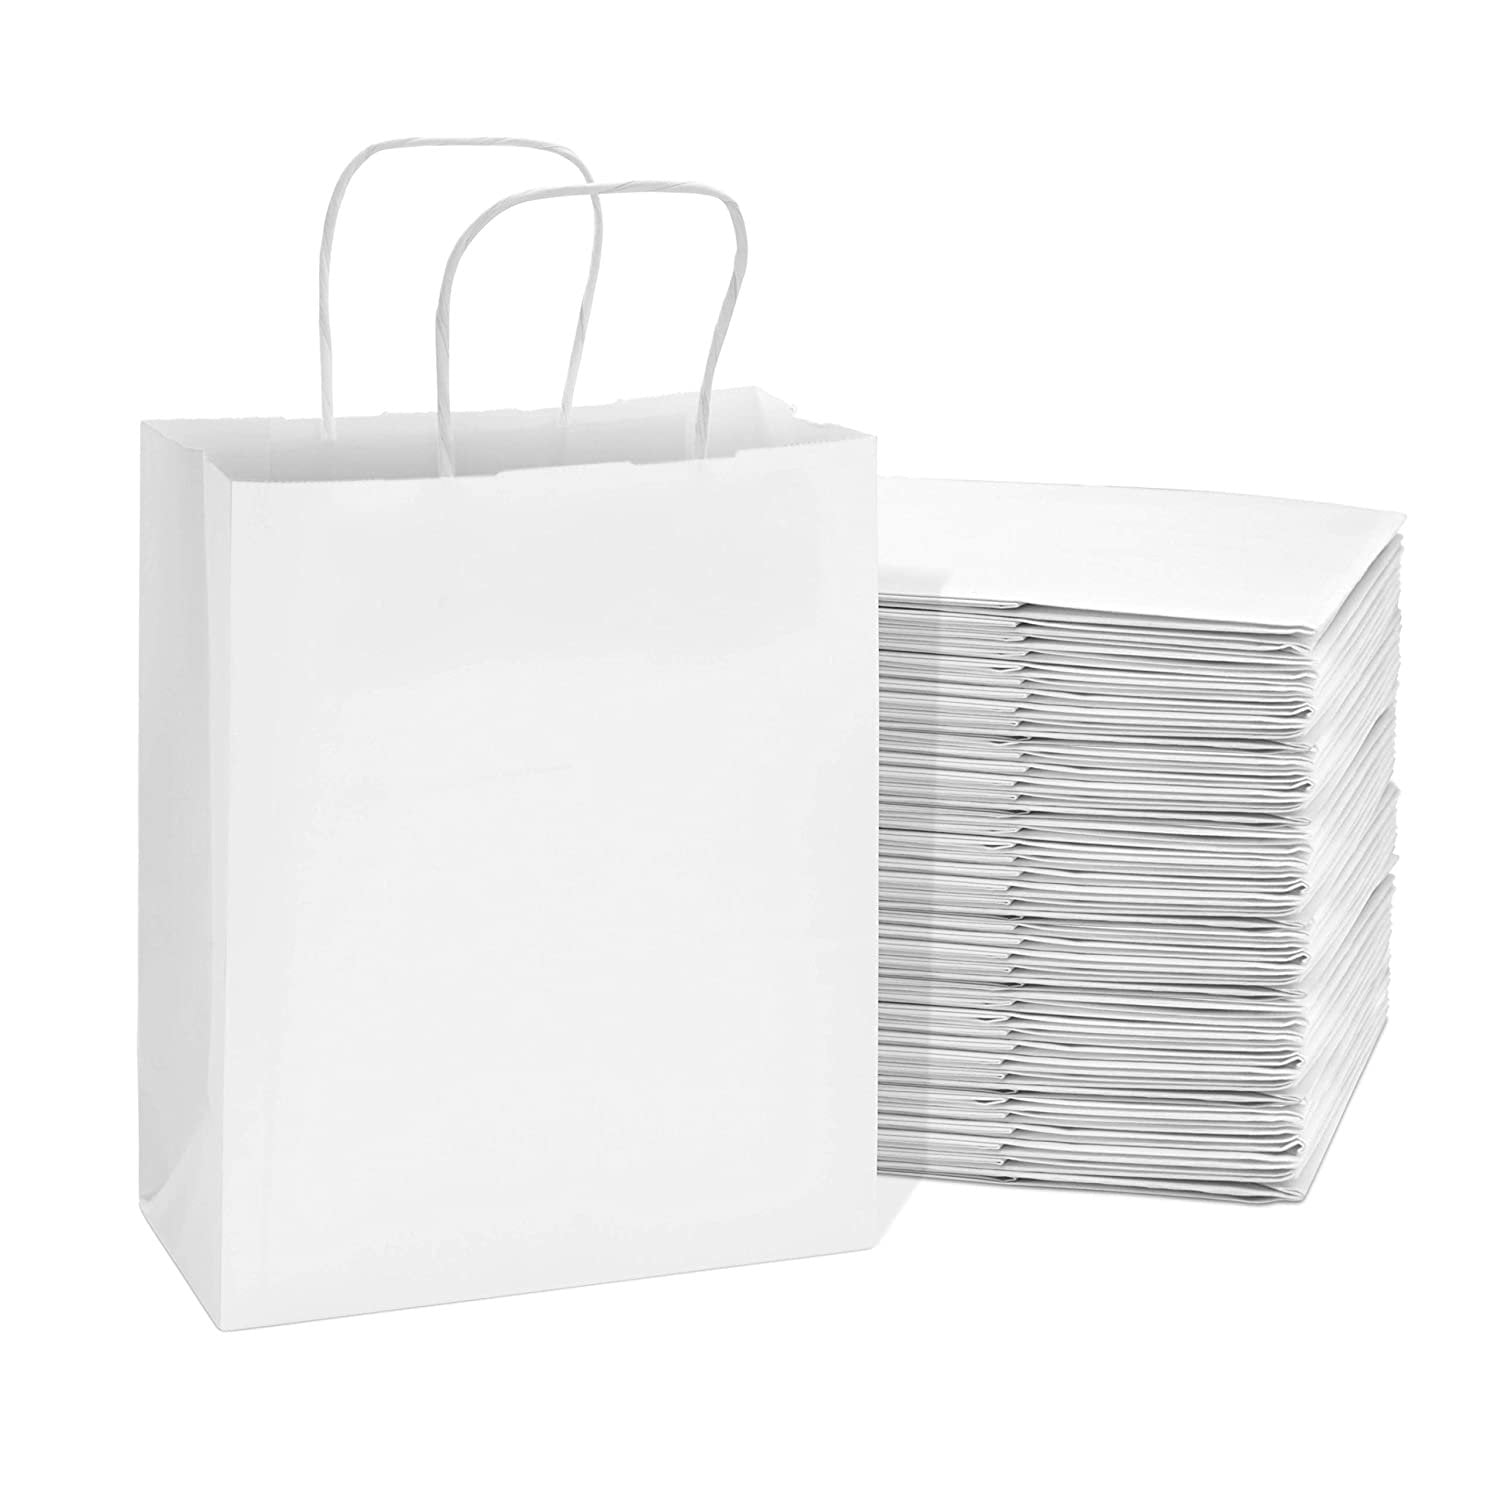 Shopping Bags 100Pcs Gift Party Bags Cub Paper Kraft Retail Brown with Handles 